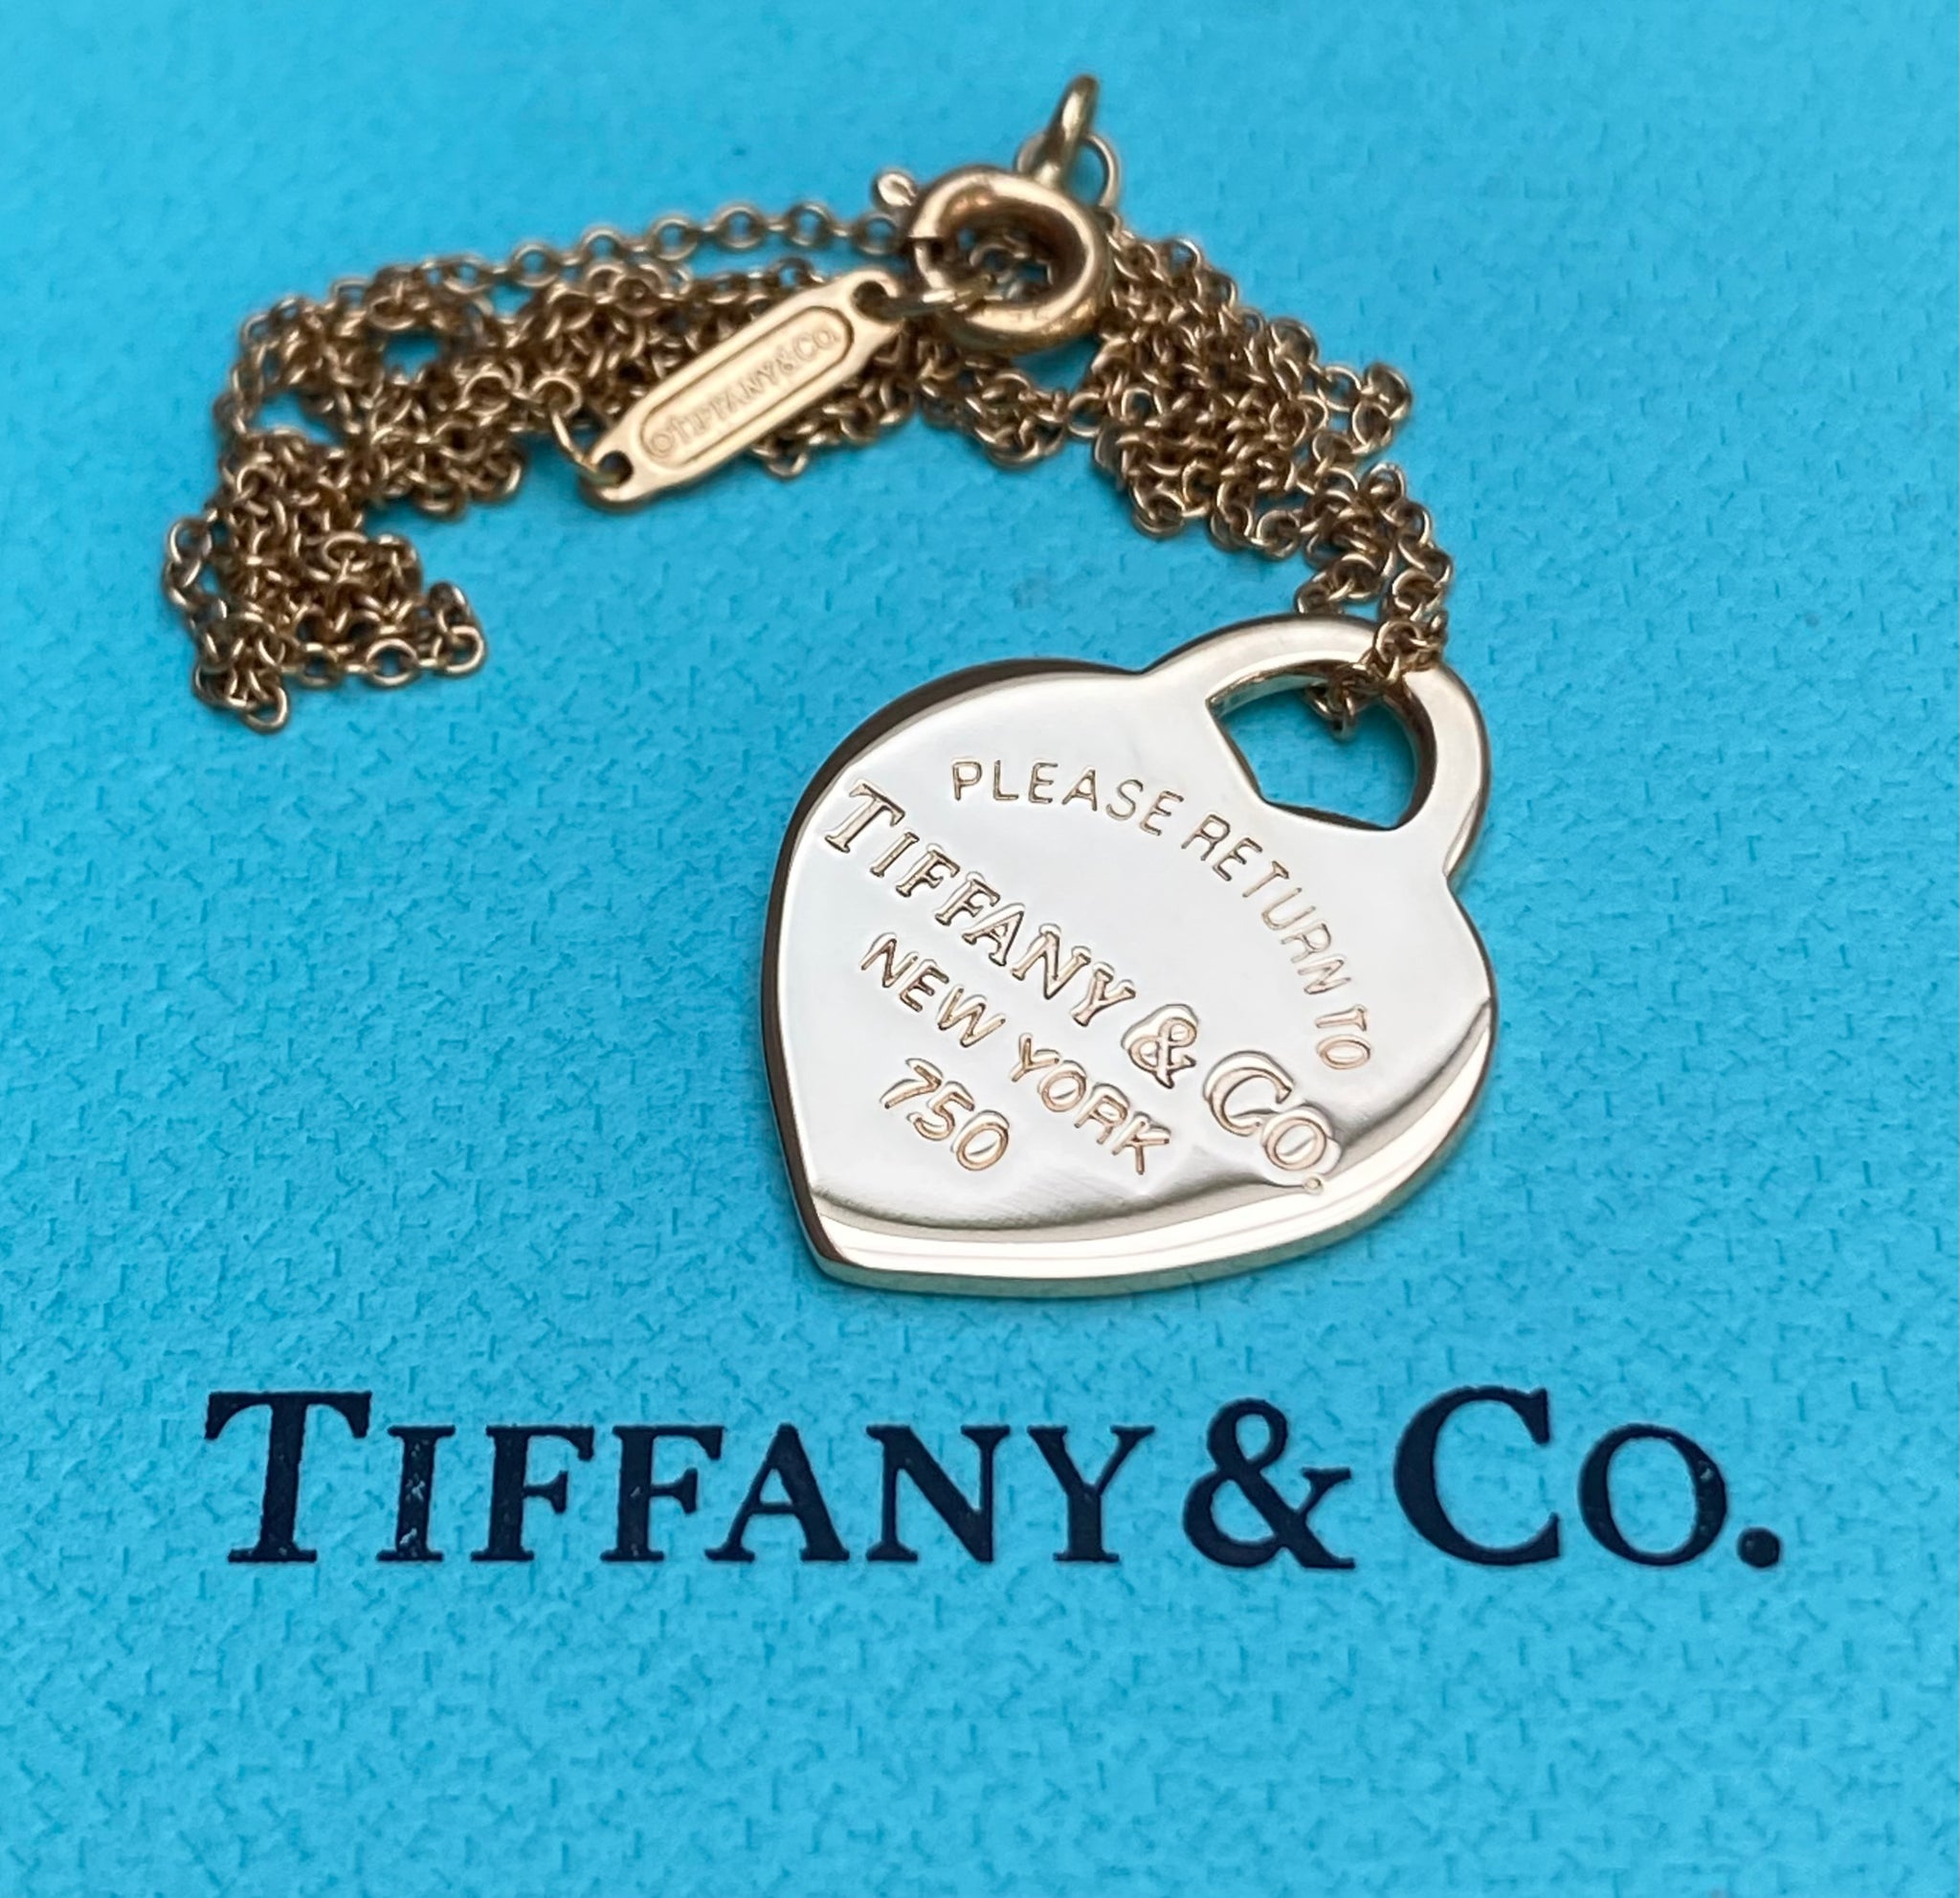 NEW* Gorgeous Tiffany Heart Pendant Necklace